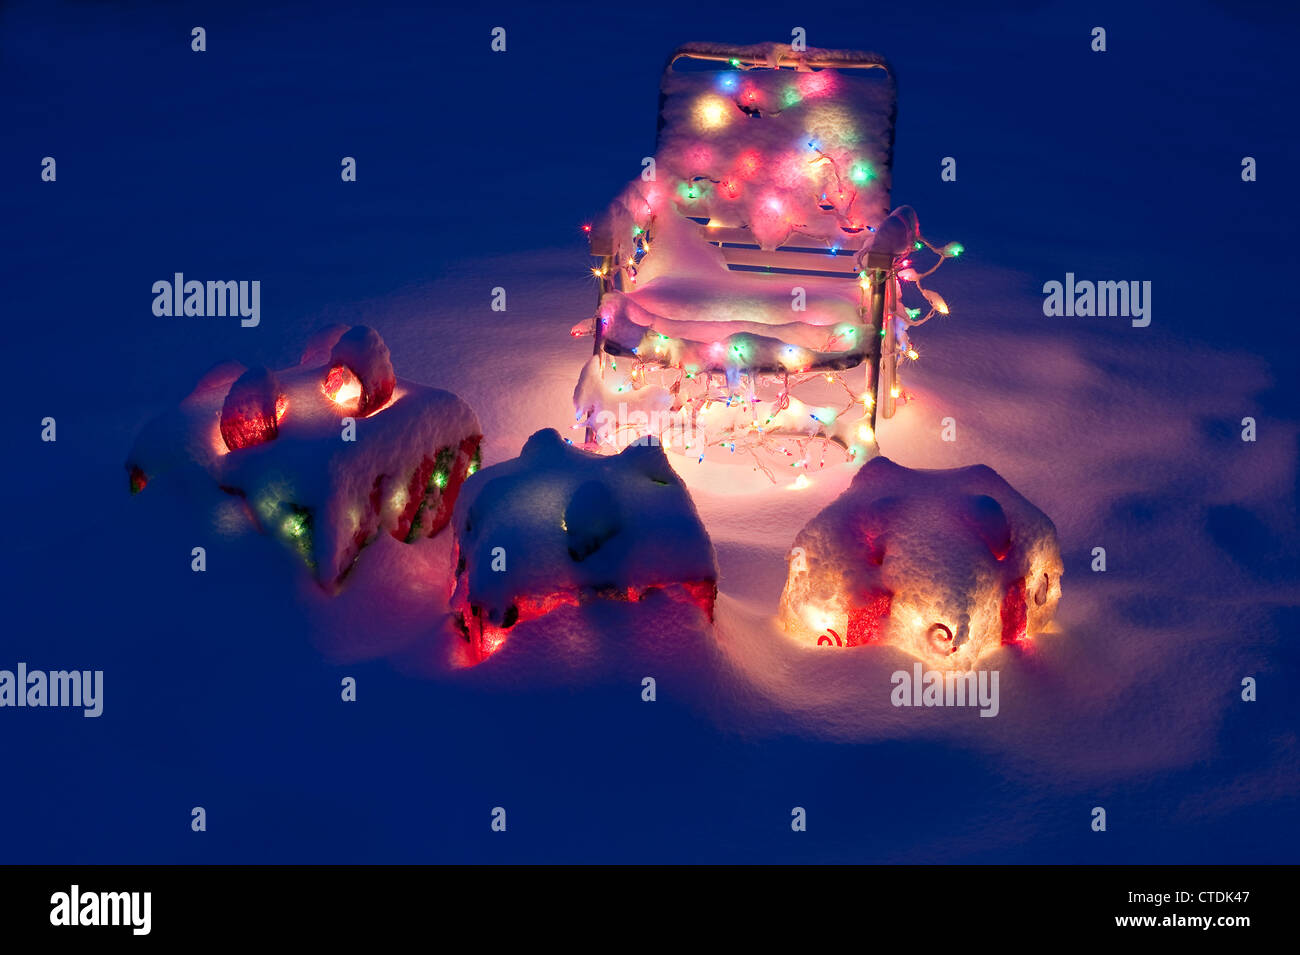 Decorated lawn chair with lit Christmas presents in snow covered backyard Stock Photo